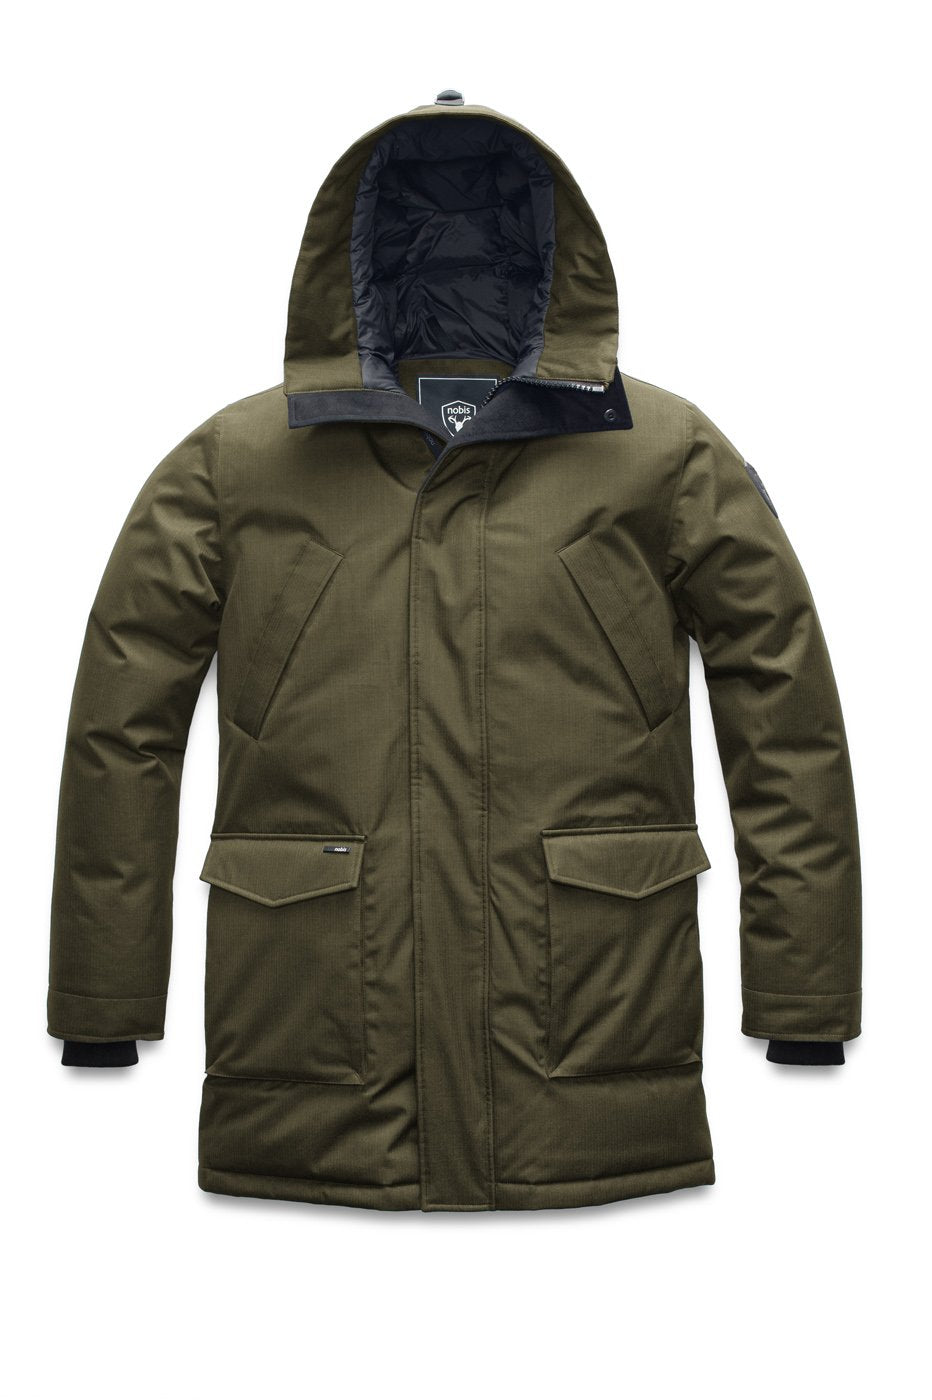 Men's thigh length down-filled parka with non-removable hood in Fatigue